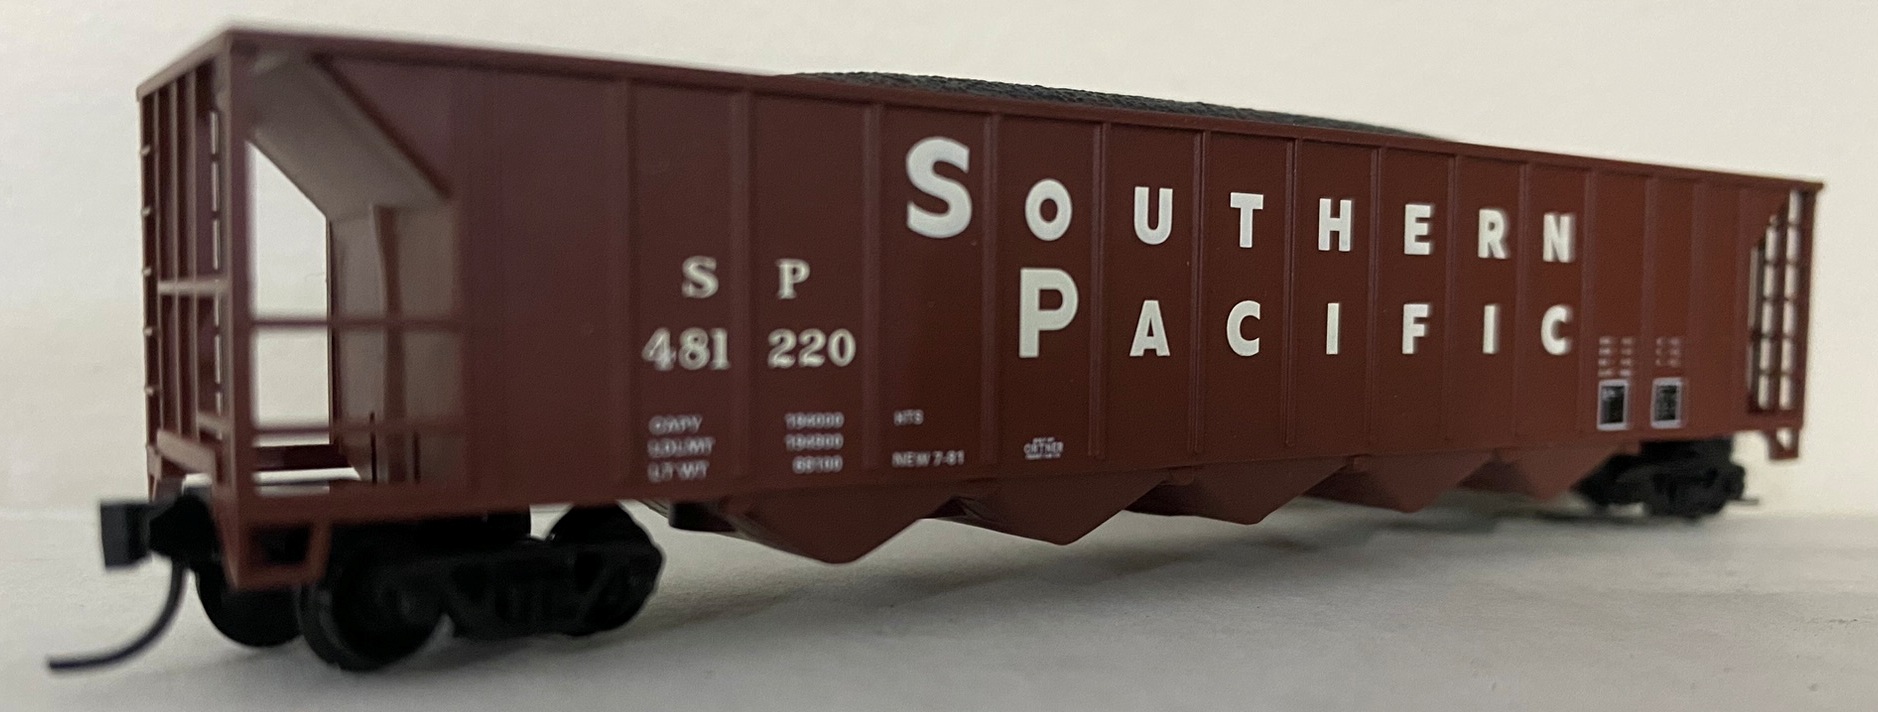 Red Caboose 25804: 5 Bay Southern Pacific Rapid Discharge Ortner Hopper Car with coal load